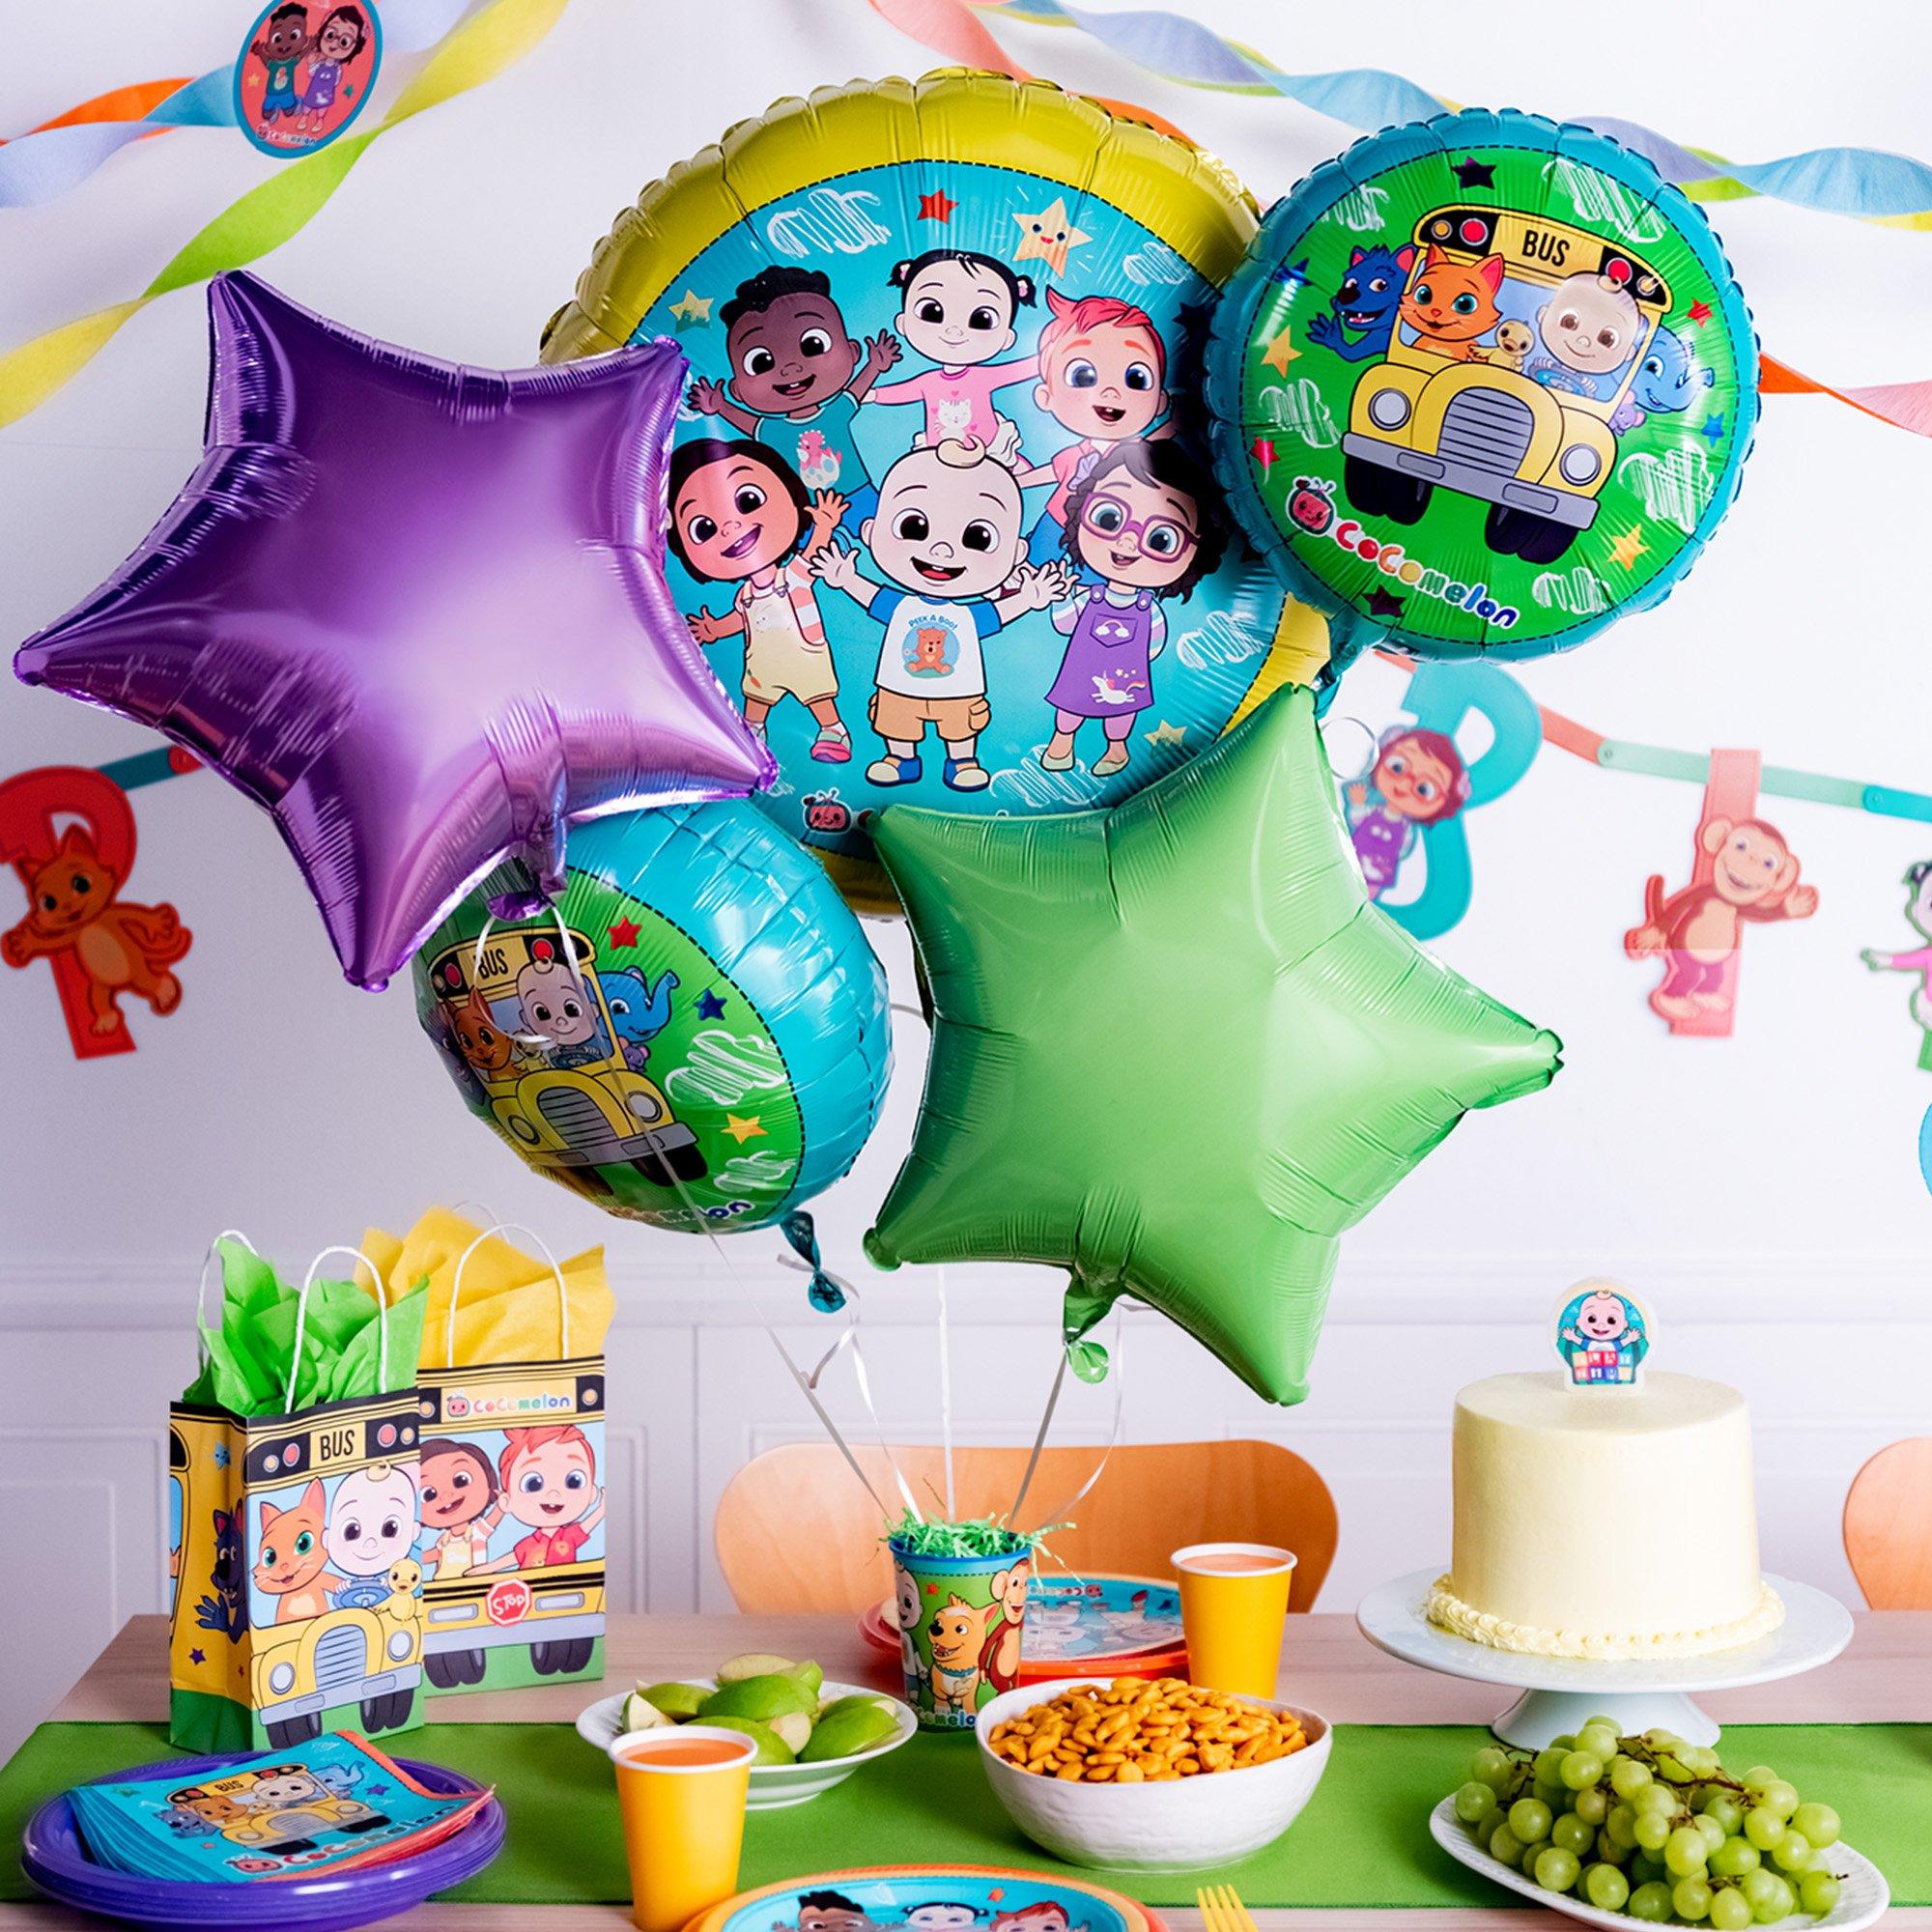 The perfect Cocomelon Themed balloons for a kid's Birthday party!